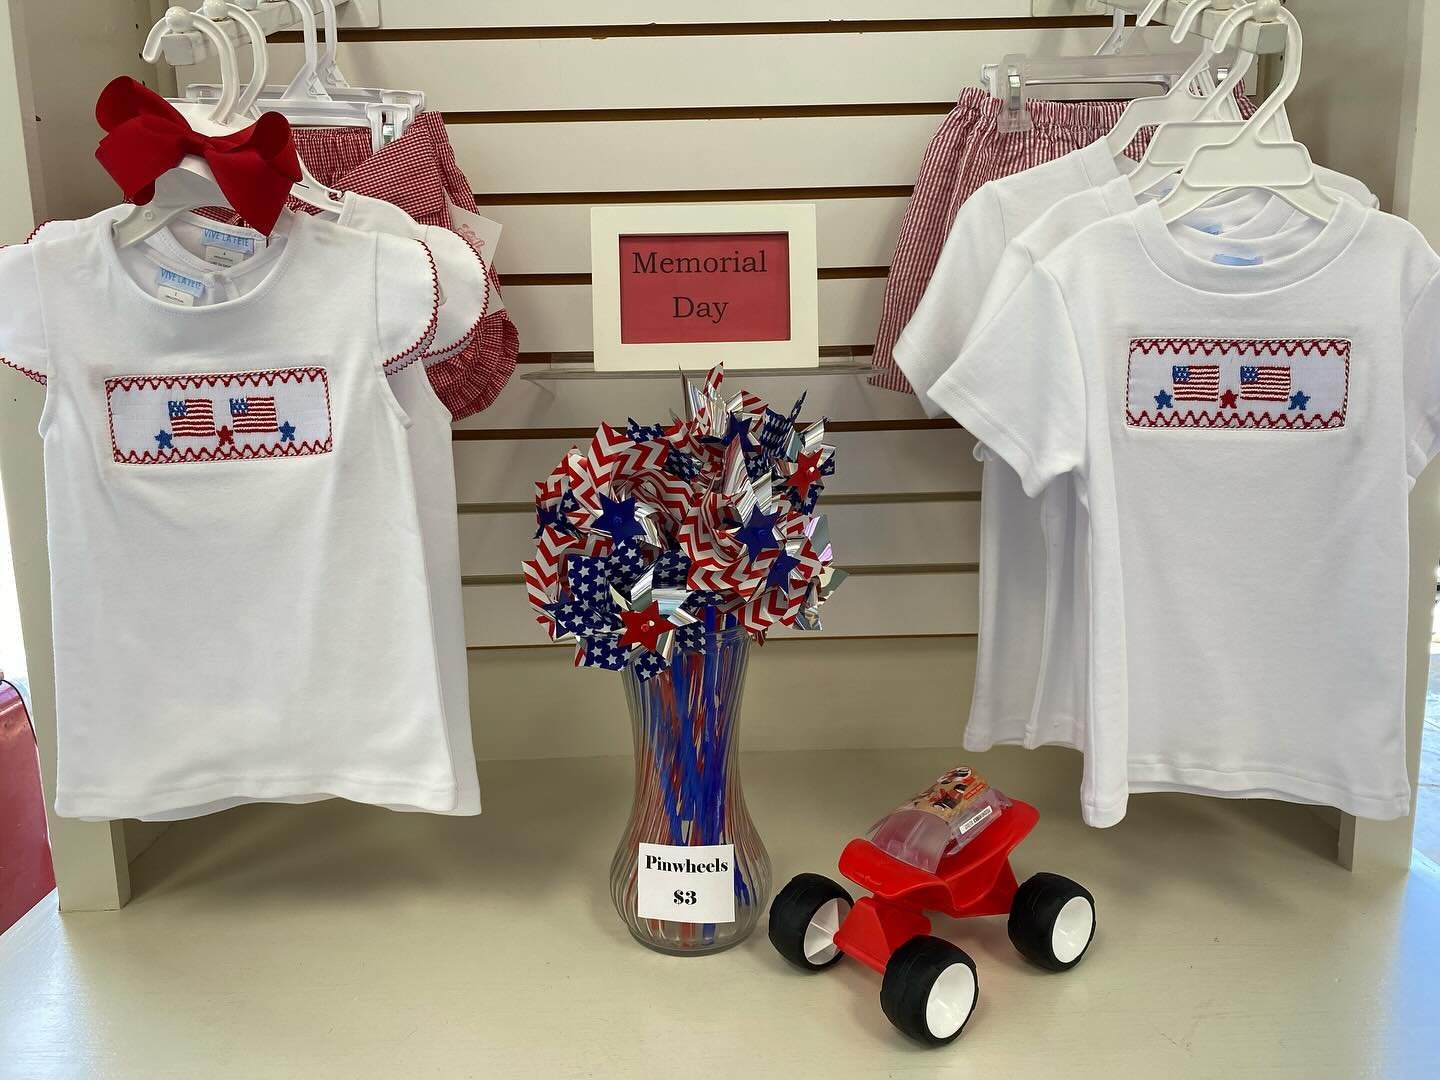 Only 3 weeks till Memorial Day Weekend&hellip;🇺🇸🇺🇸🇺🇸!
.
.
#childrensshop #childrensshopatl #memorialday #flags #smocking #matchingkids #twins #shopsmall #shoplocal